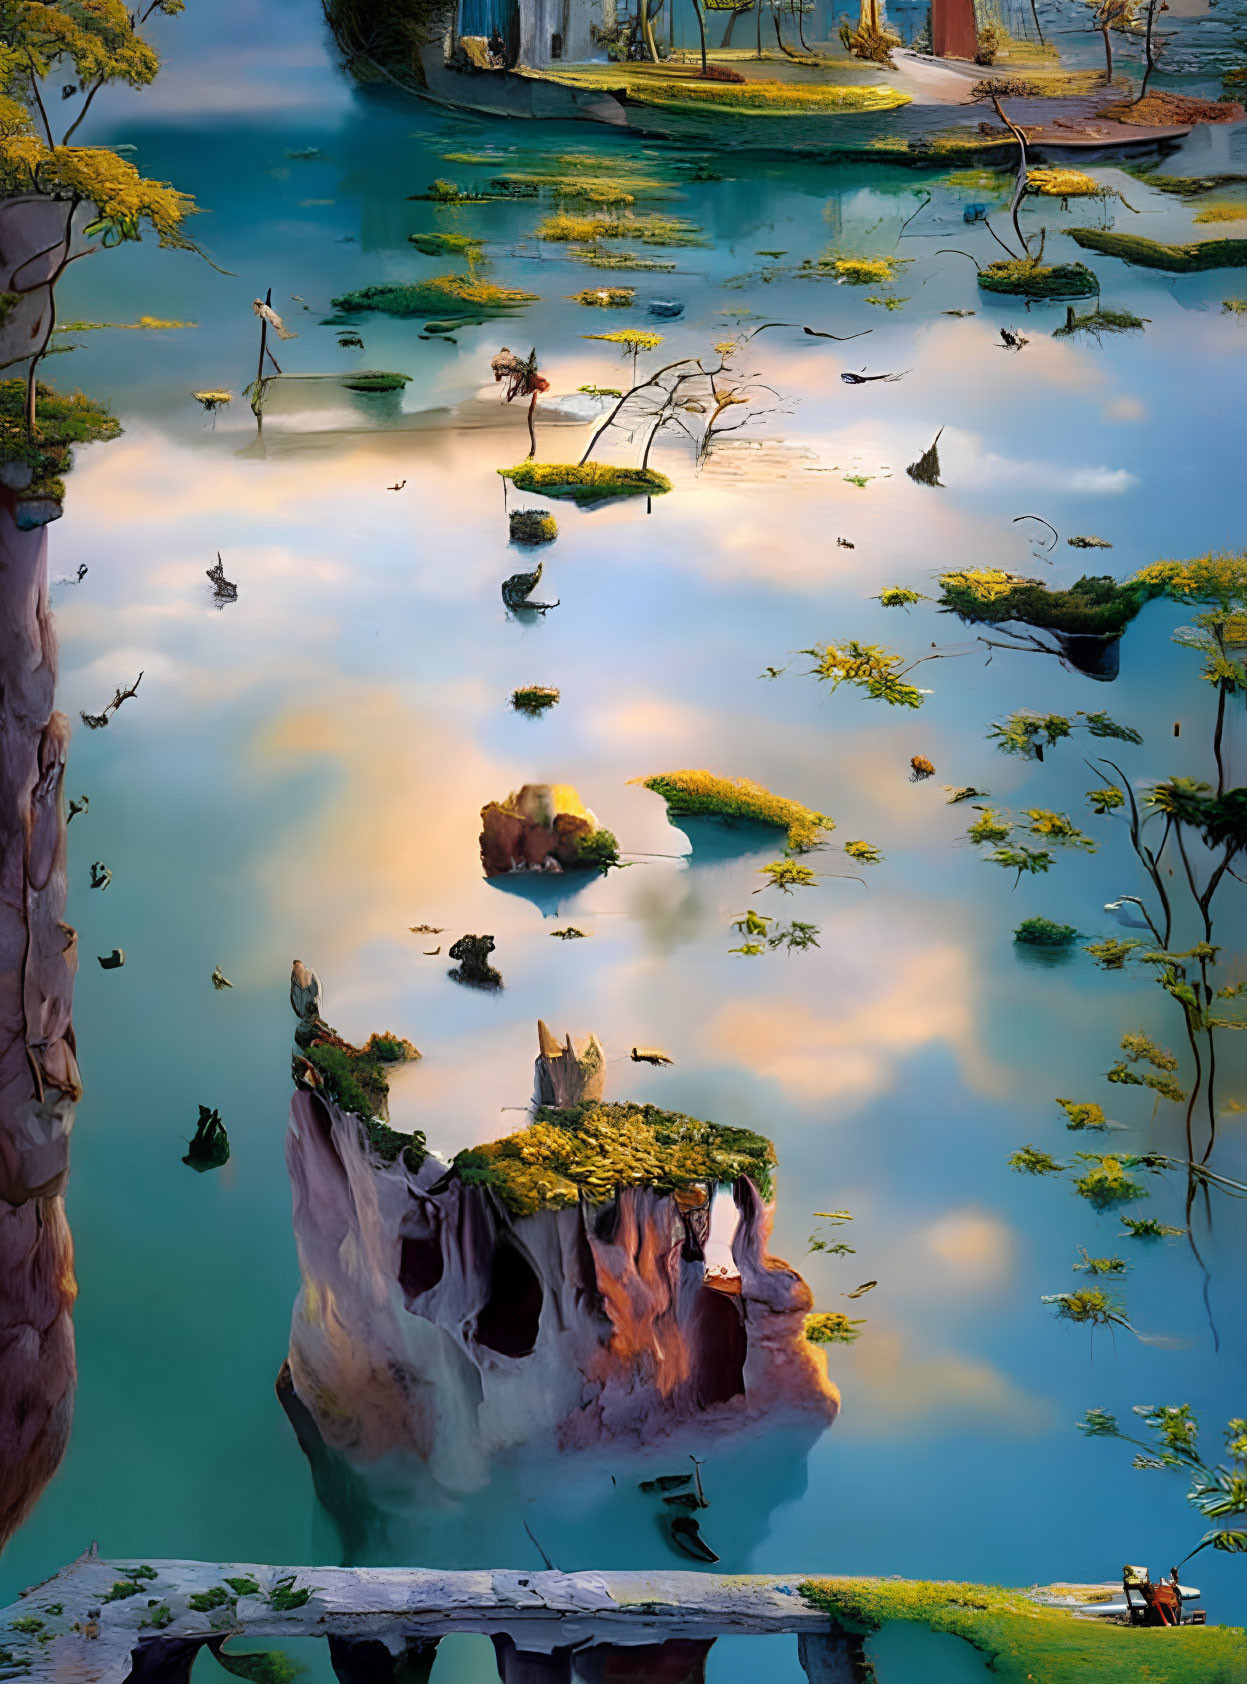 Tranquil landscape with inverted cliffs, reflective waters, vibrant trees, and greenery